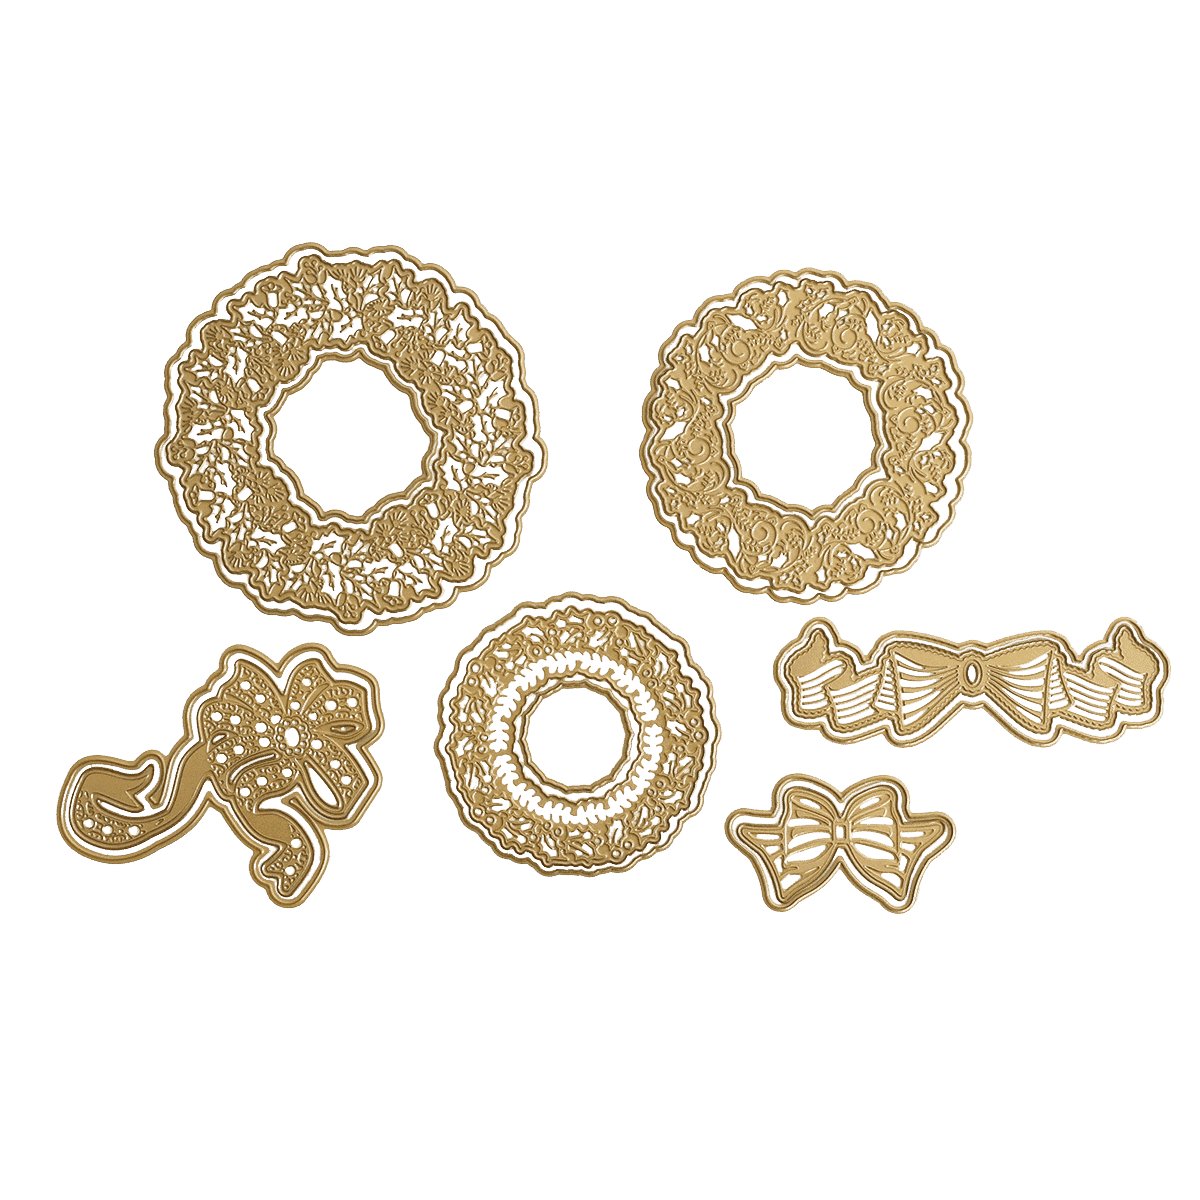 a group of decorative items on a green background.